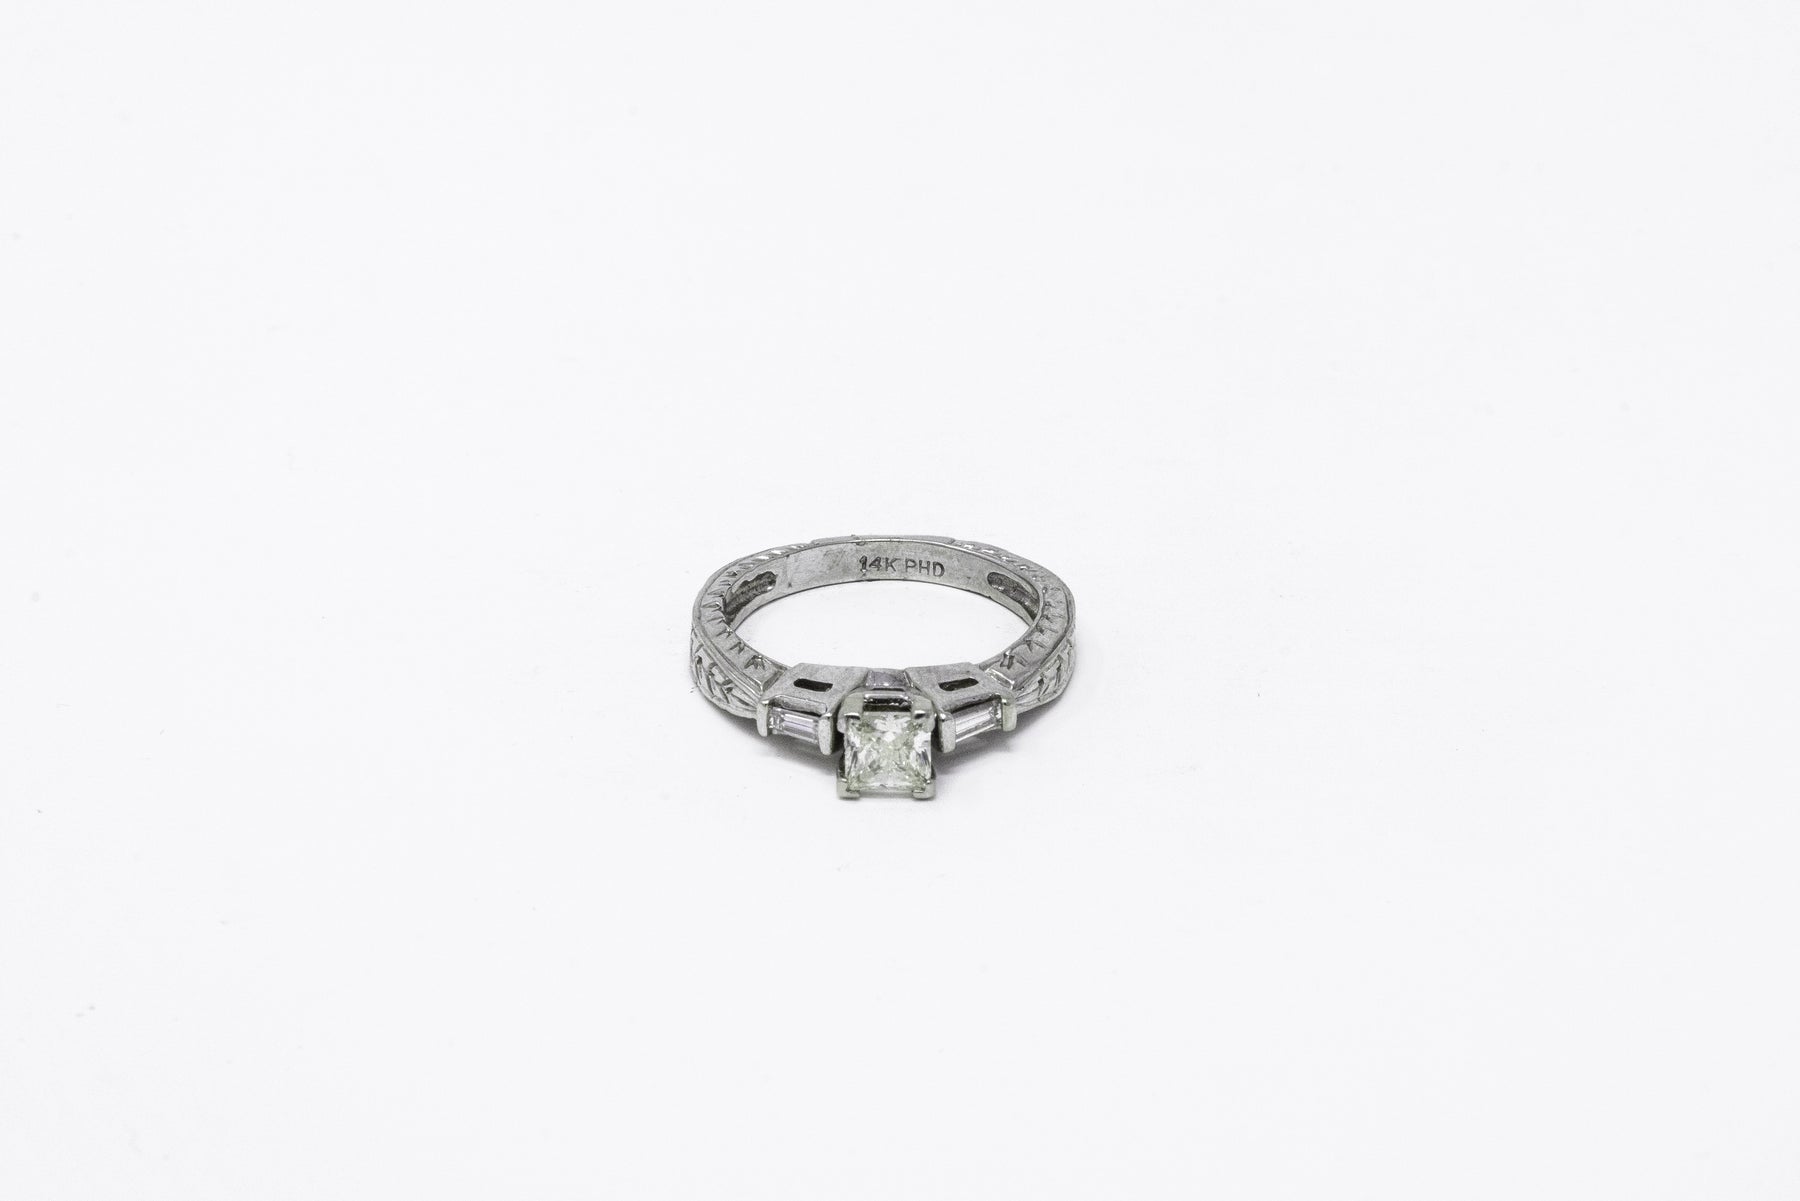 .52 point Princess Cut and .18 point Tapered Baguette Cut Diamond Ring